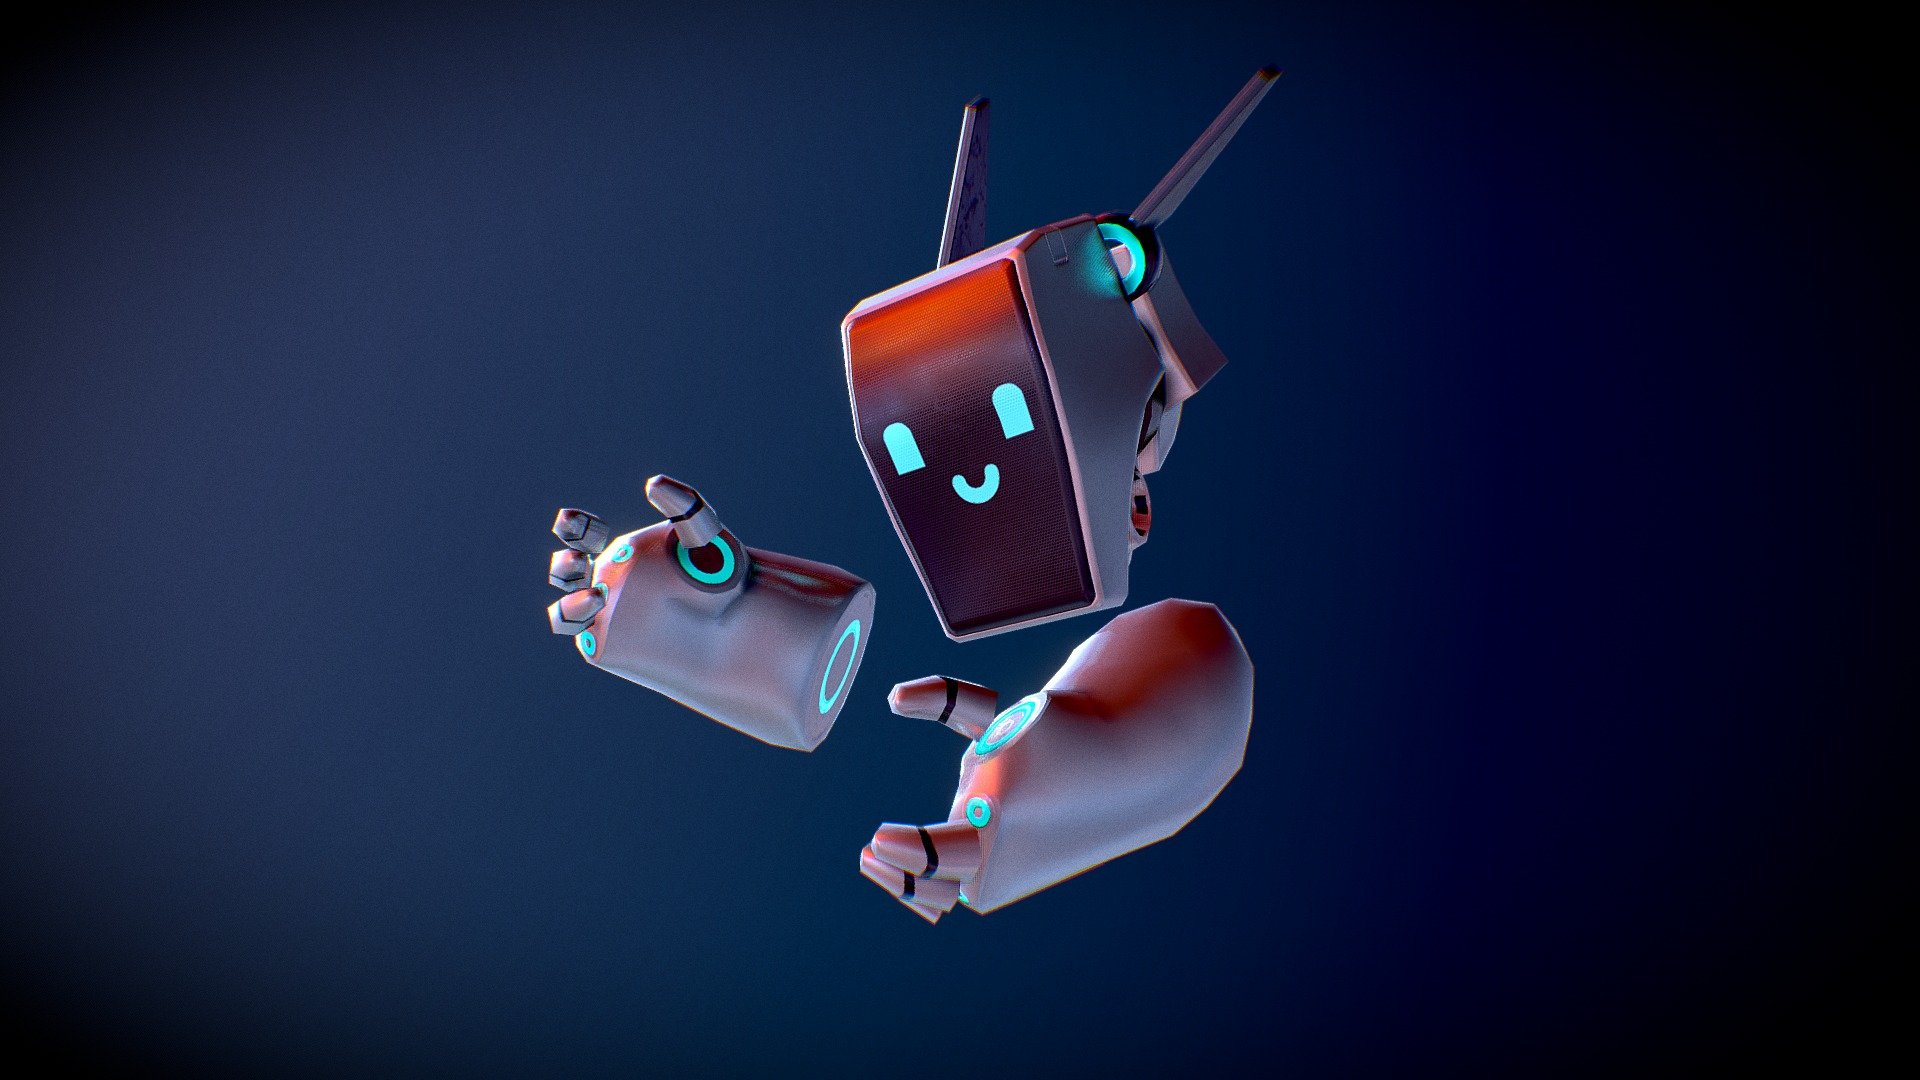 Set repeat animation to see loops
Party Pumper VR game - Steam link to download the game
Artstation

My part of work: Rig, Animations - Robot helper ANIMATION - 3D model by GenEugene 3d model